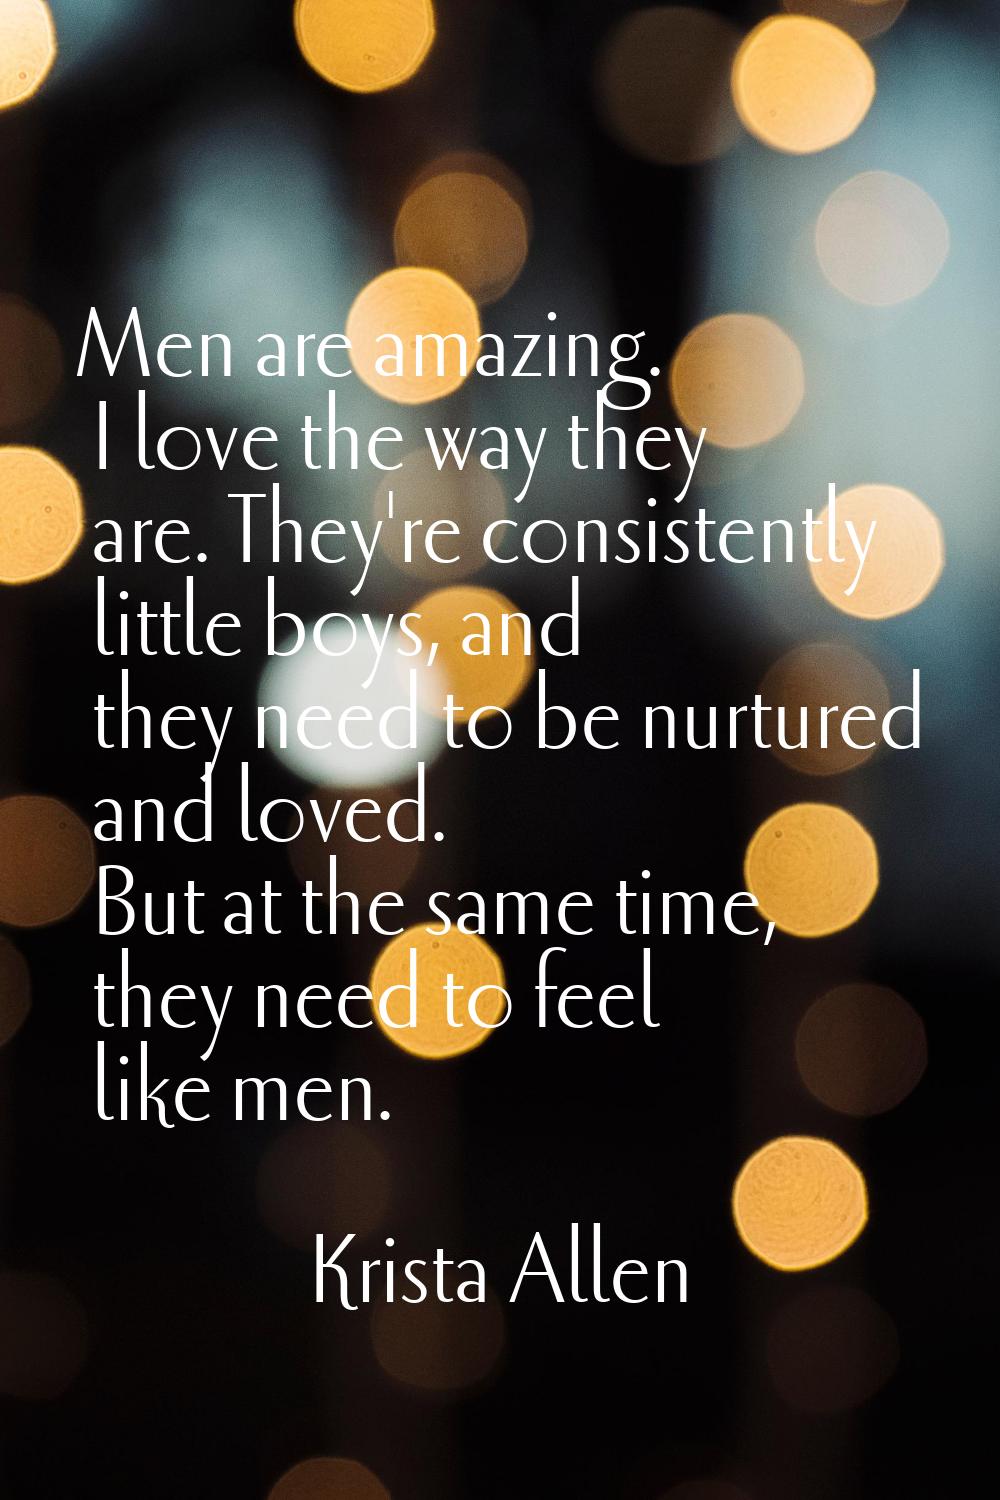 Men are amazing. I love the way they are. They're consistently little boys, and they need to be nur